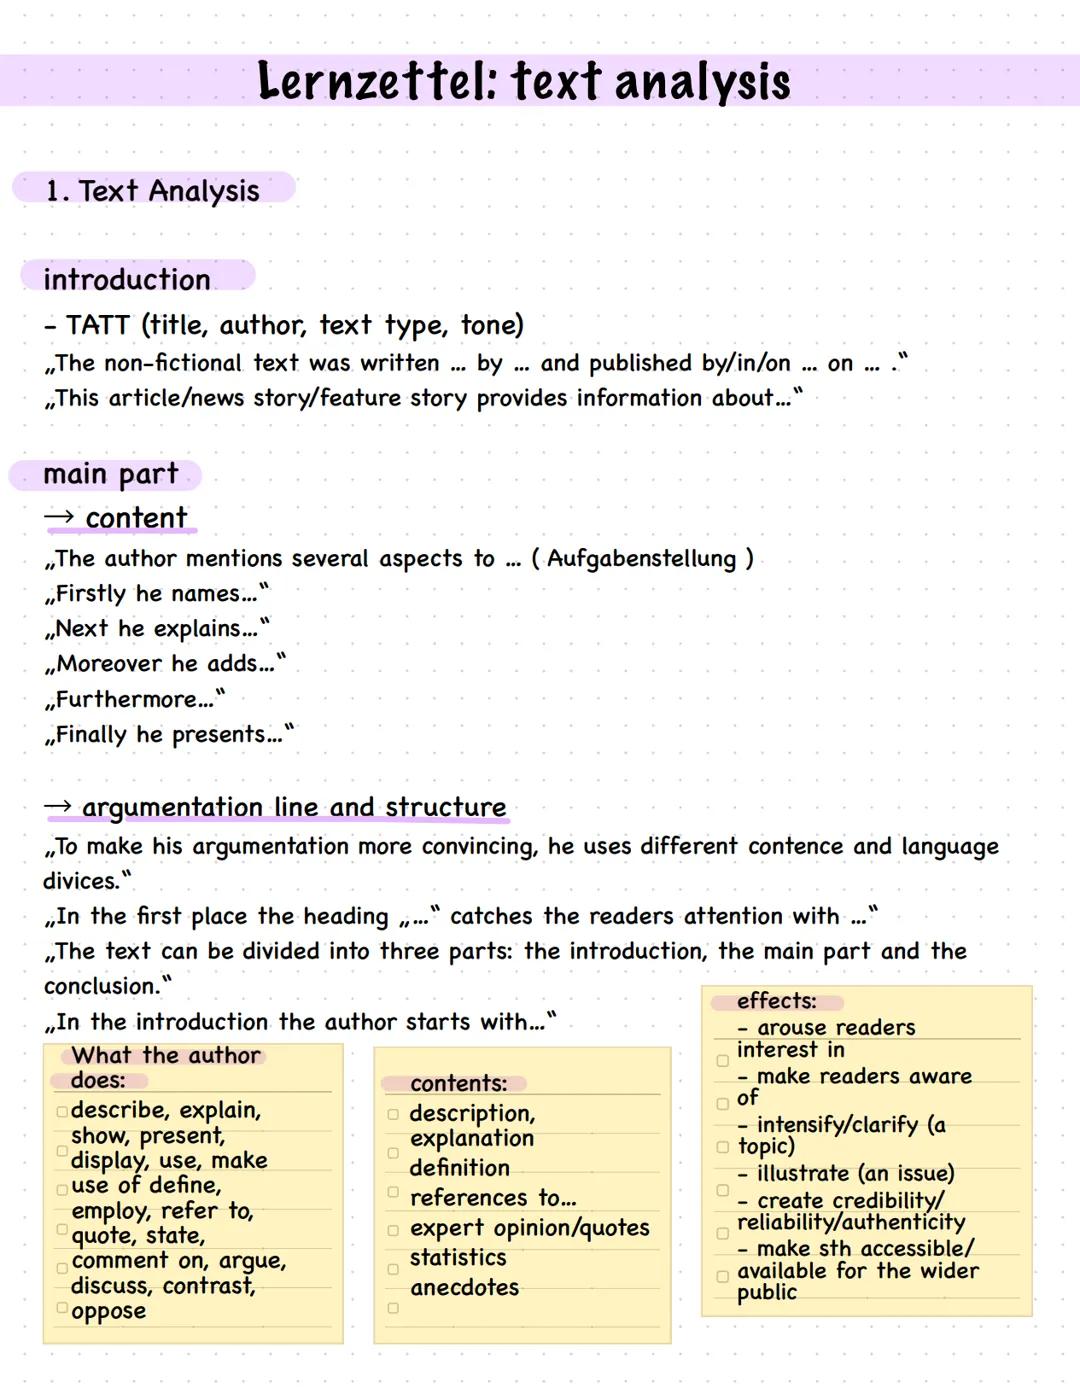 1. Text Analysis
Lernzettel: text analysis
introduction
- TATT (title, author, text type, tone)
,,The non-fictional text was written by ... 